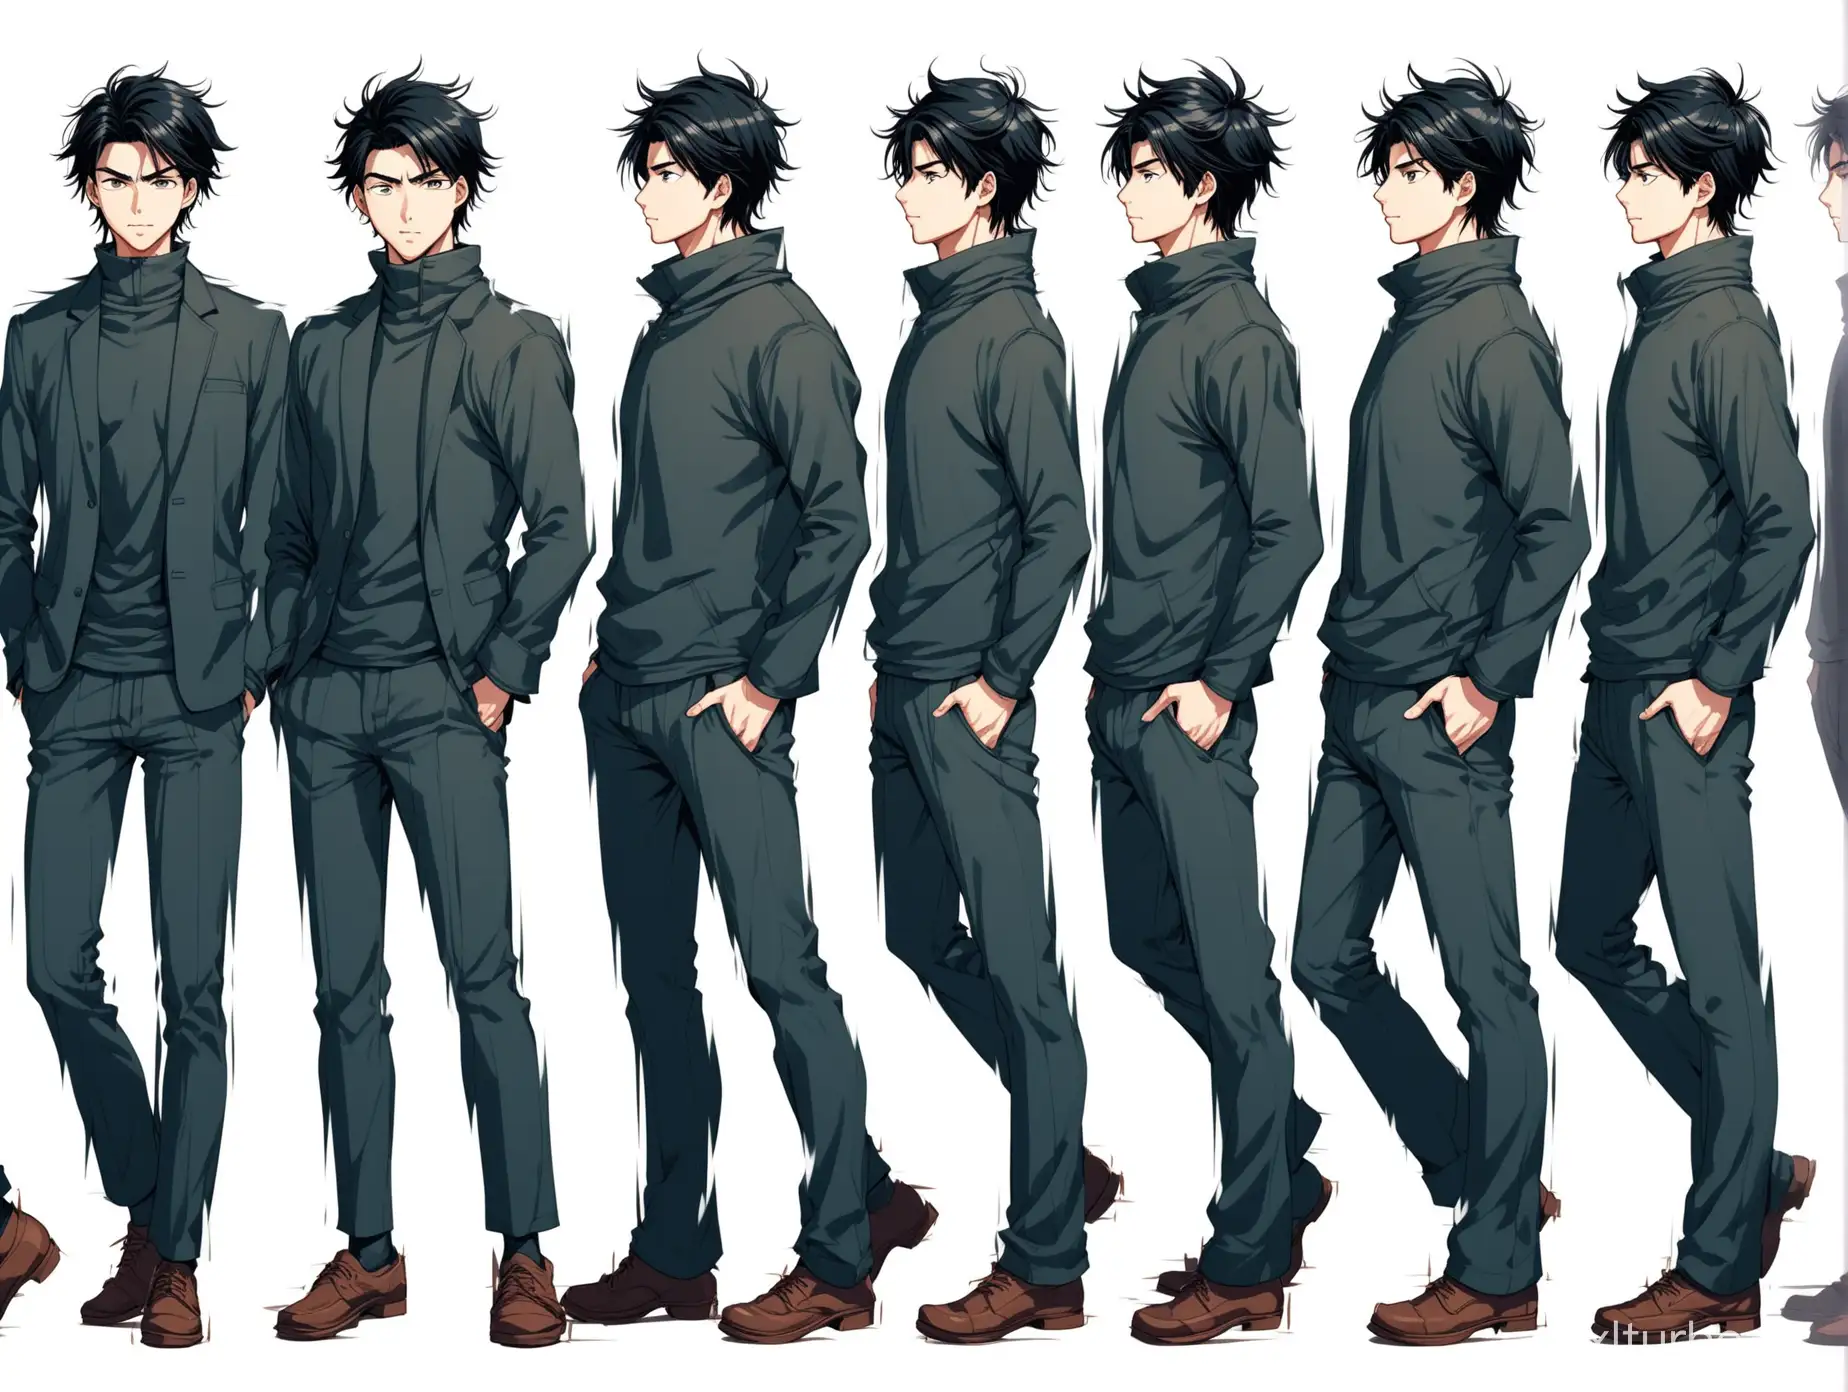 When you generate a horizontal high-definition image of a tall young man with black hair, full body photo, Japanese manga style, modern male characters, 8 different angles of movement posture, requiring the same appearance. The same winter clothing, different movement postures, with a distance between each posture